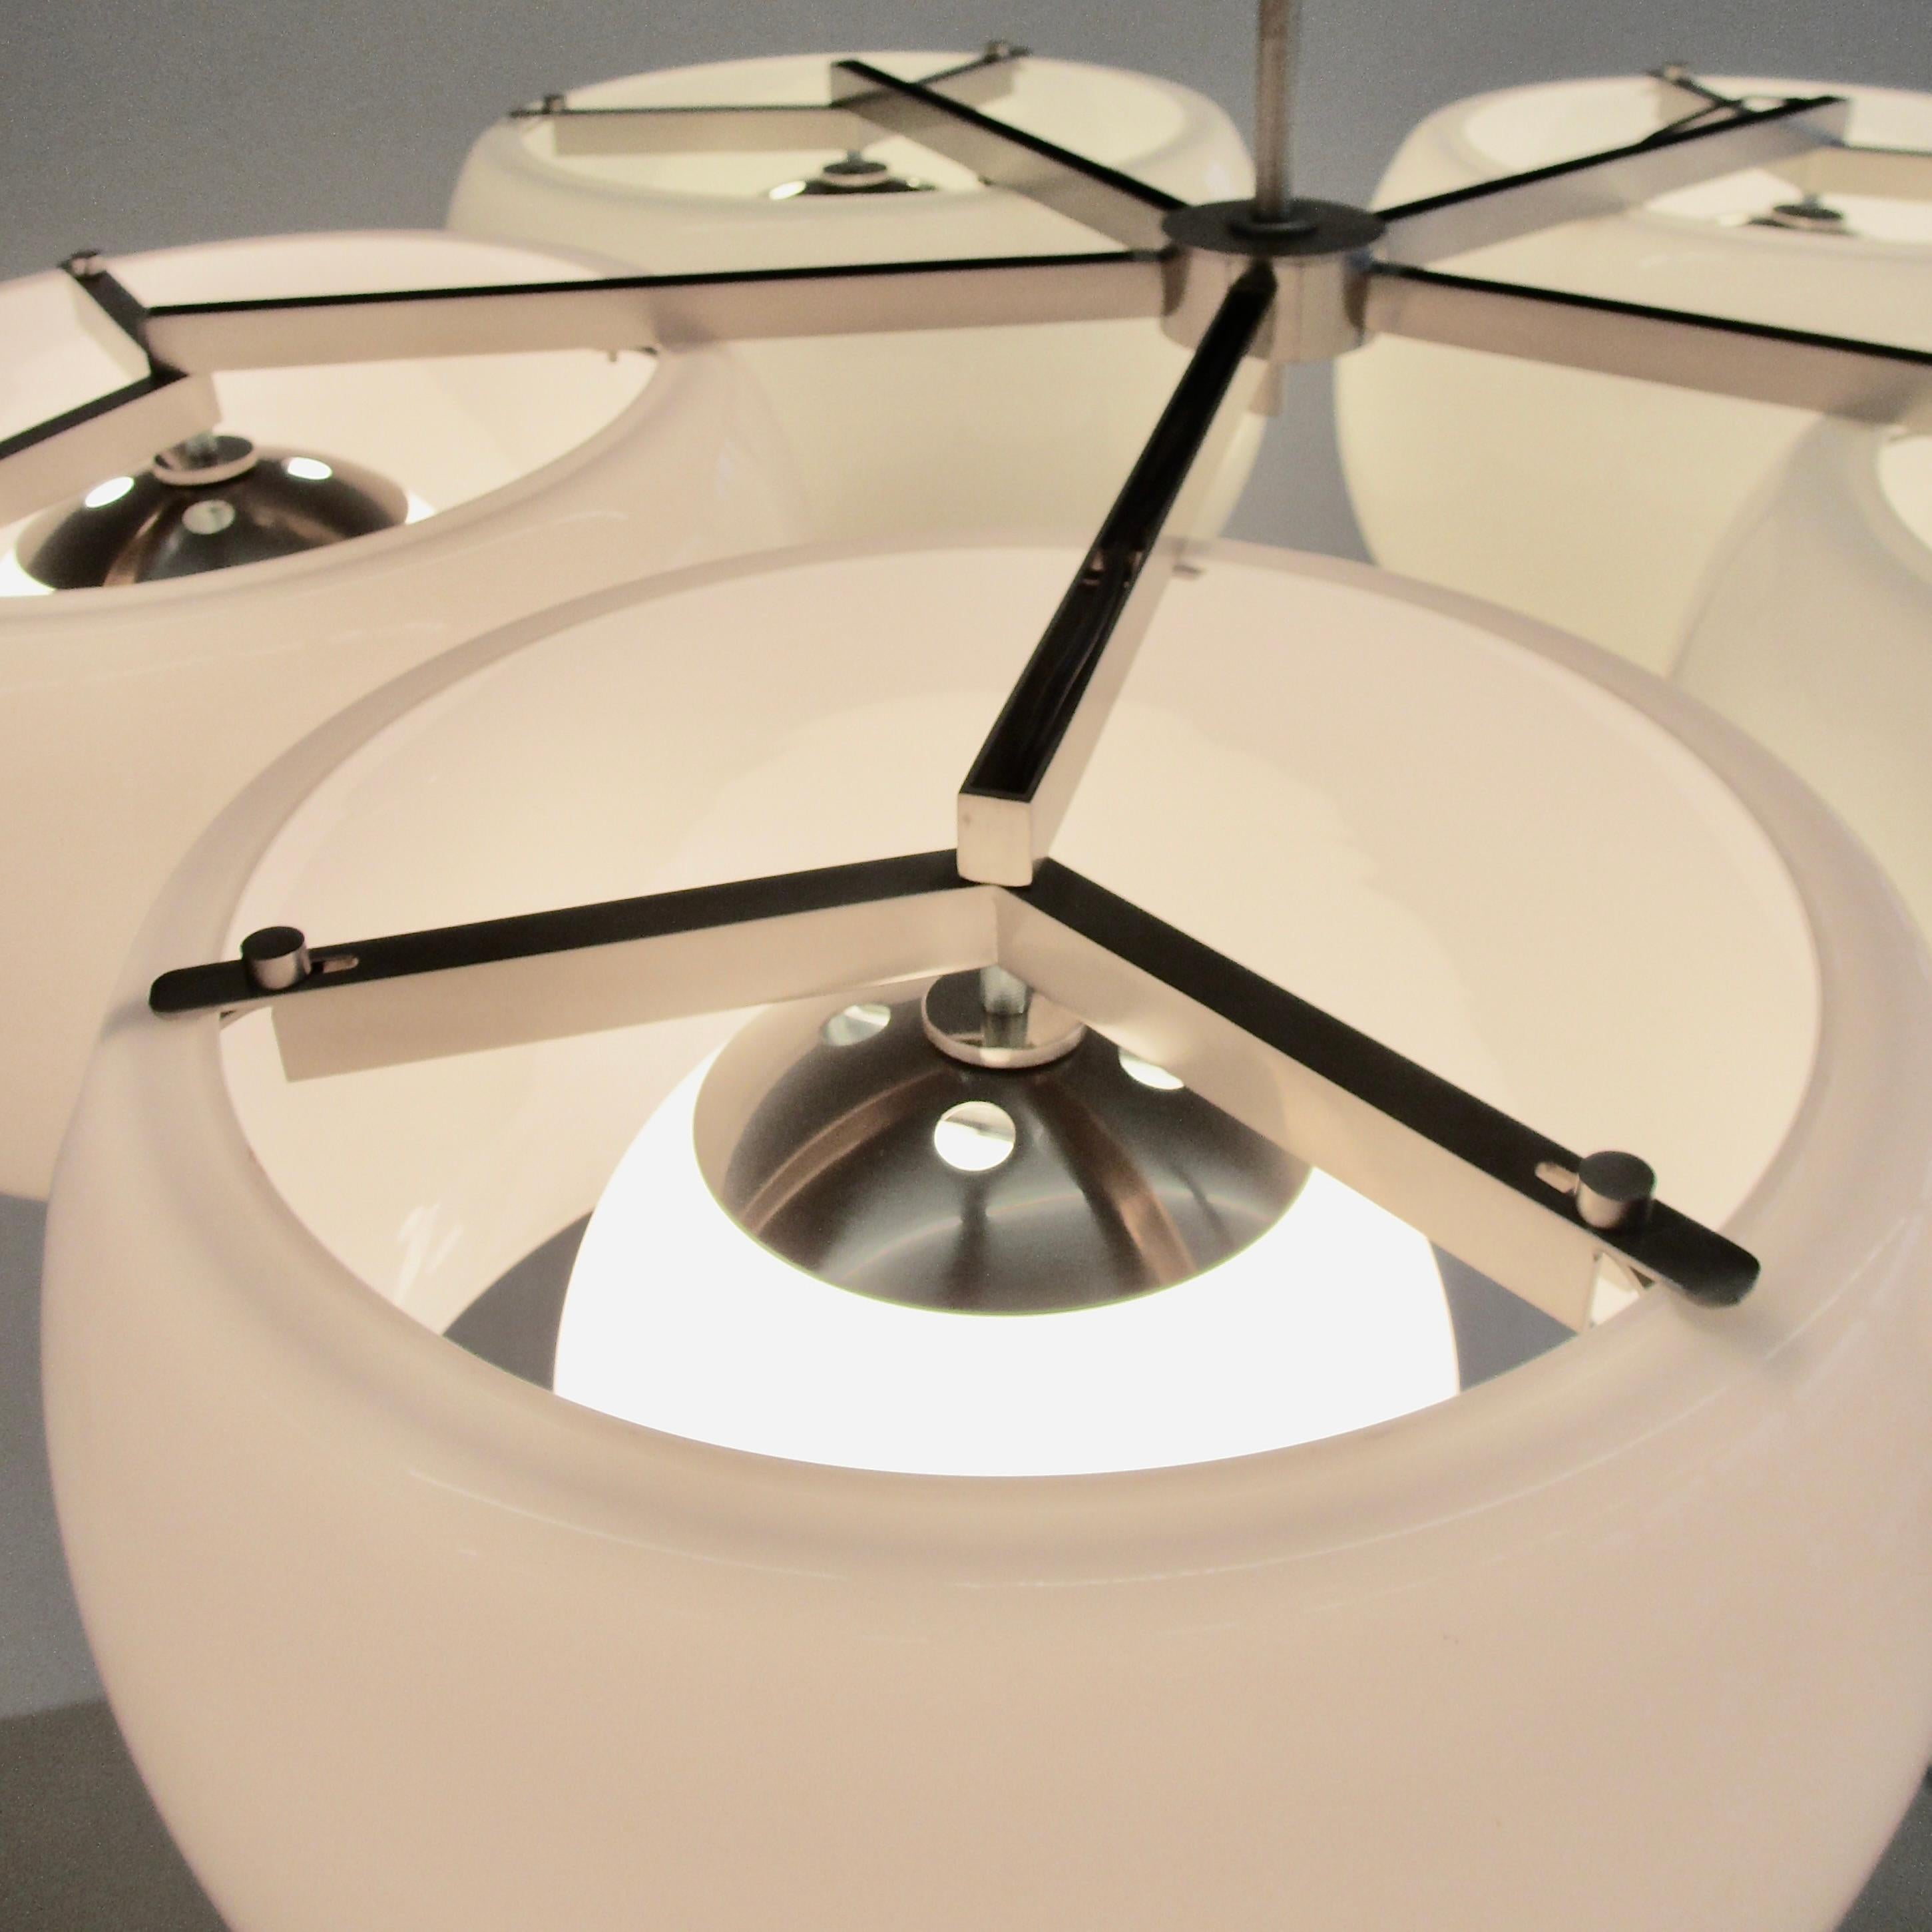 Mid-Century Modern Large Ceiling Lamp Pentaclinio Designed by Vico Magistretti for Artemide, 1961